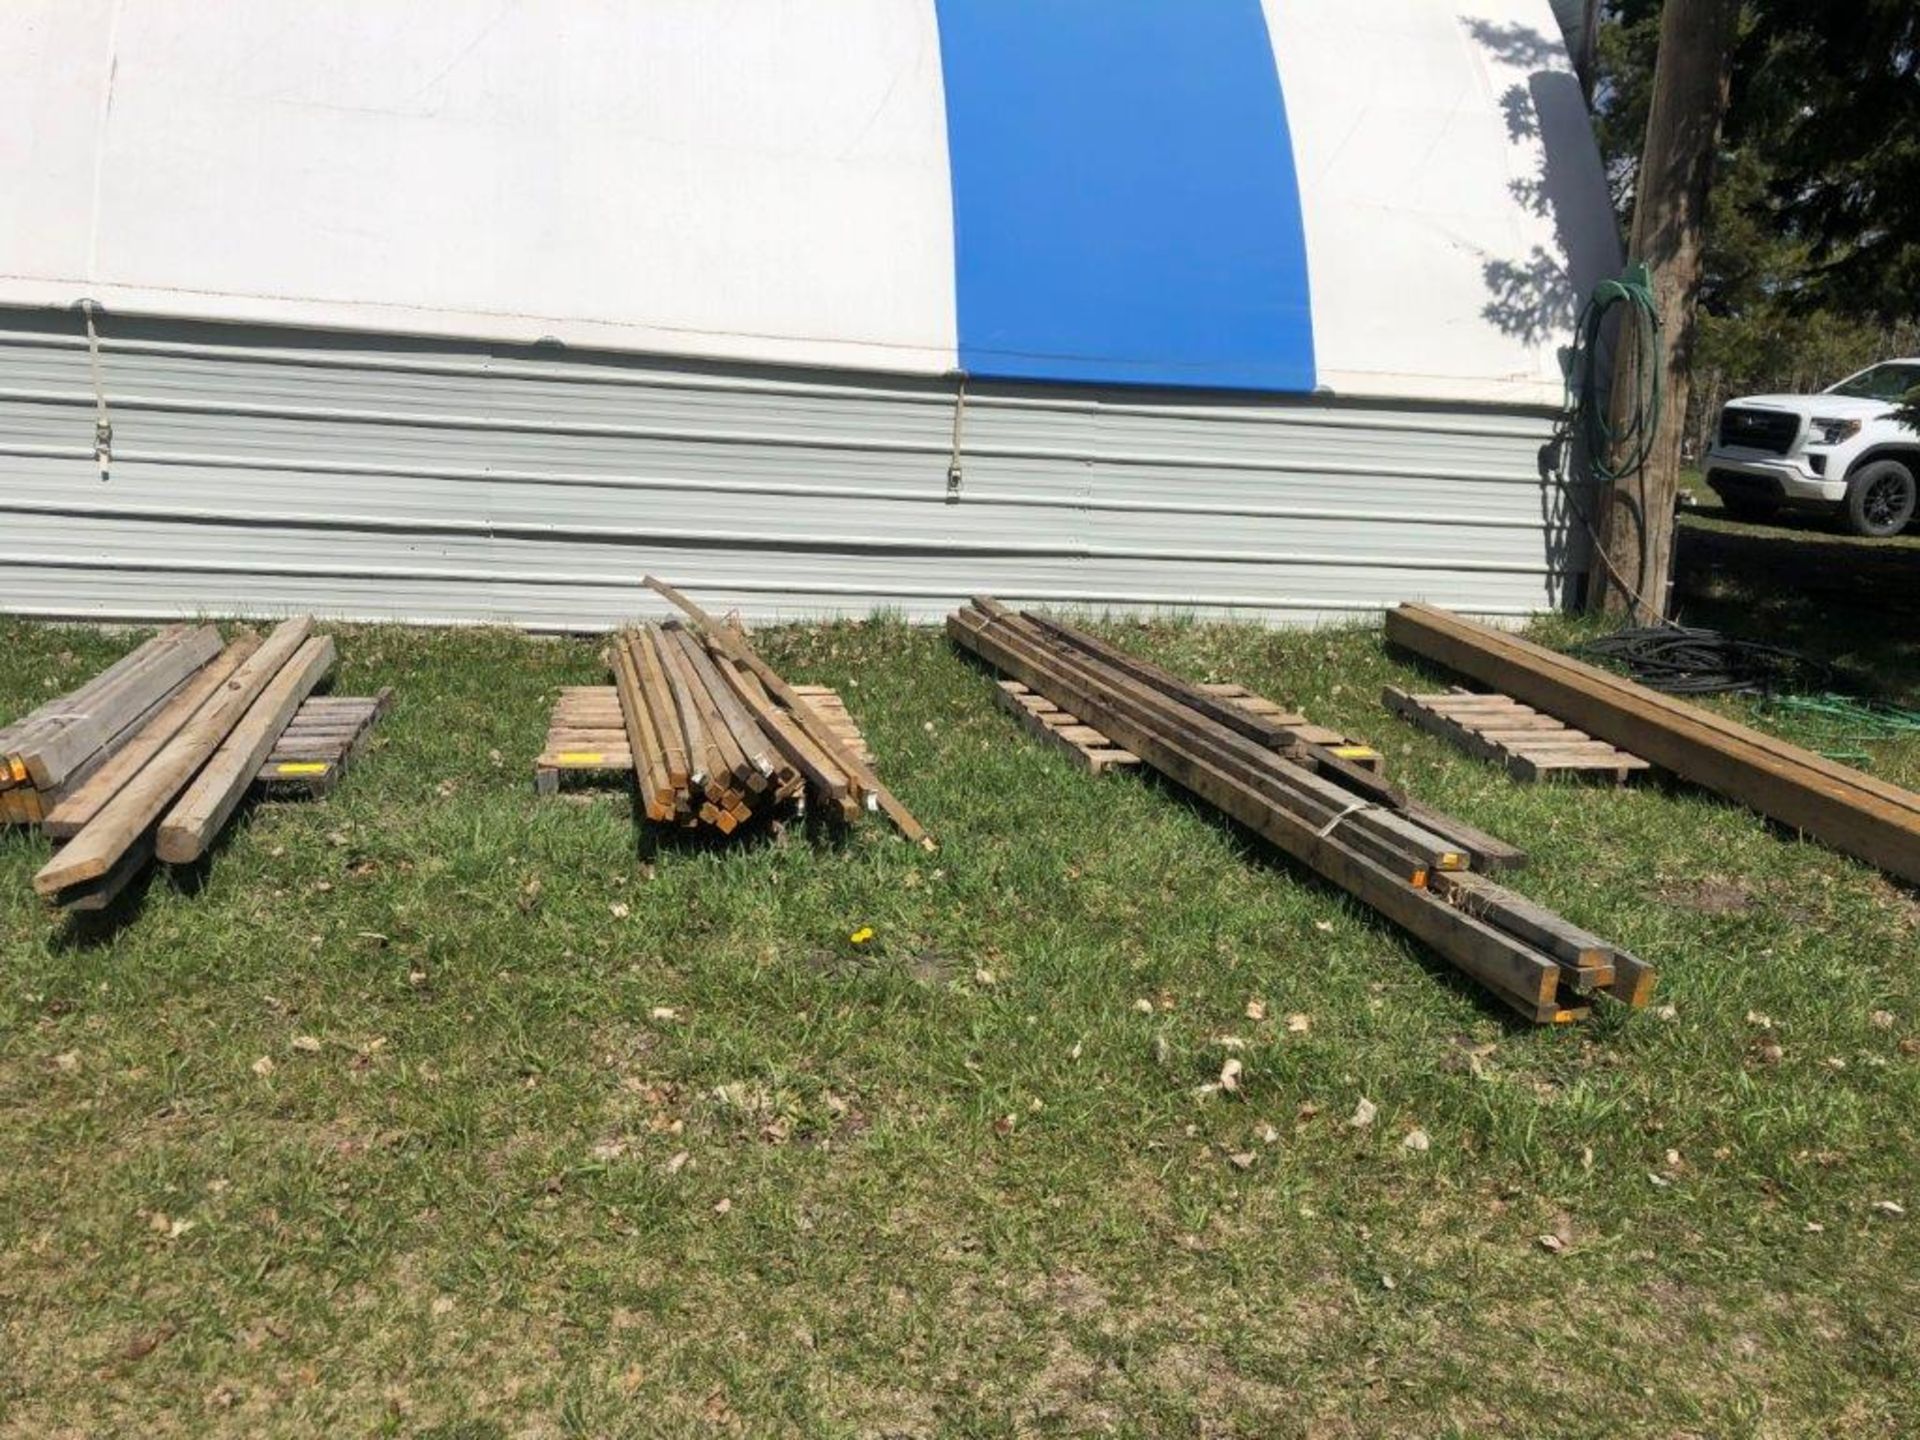 2-6"X6"X12FT TREATED POSTS AND ASSORTED LUMBER - Image 2 of 5